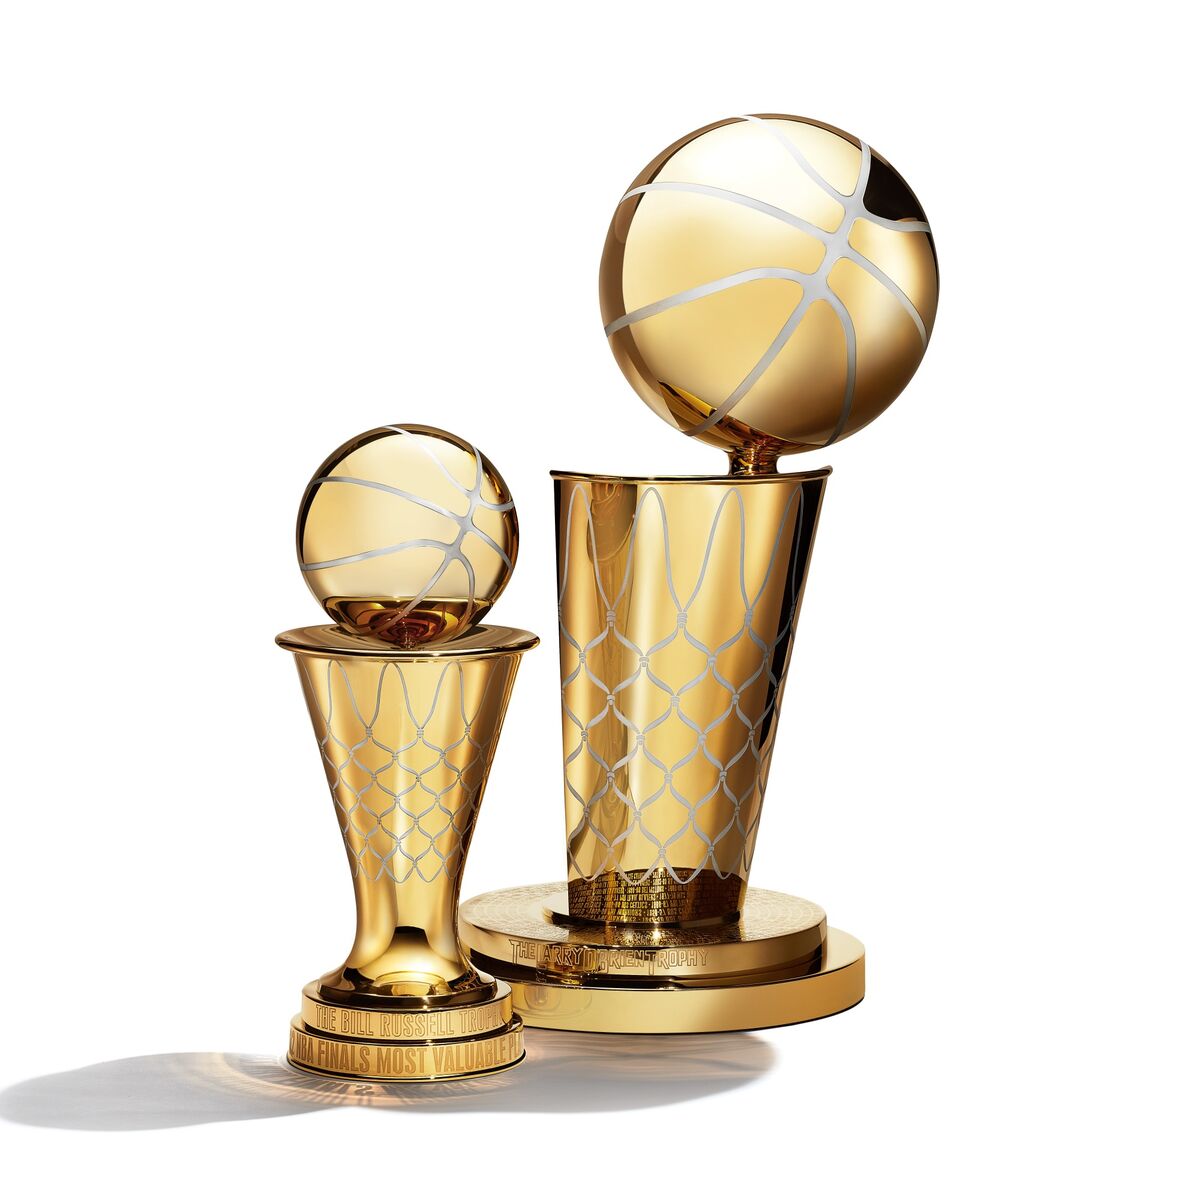 Larry O'Brien NBA Championship Trophy By Tiffany Is Redesigned ...